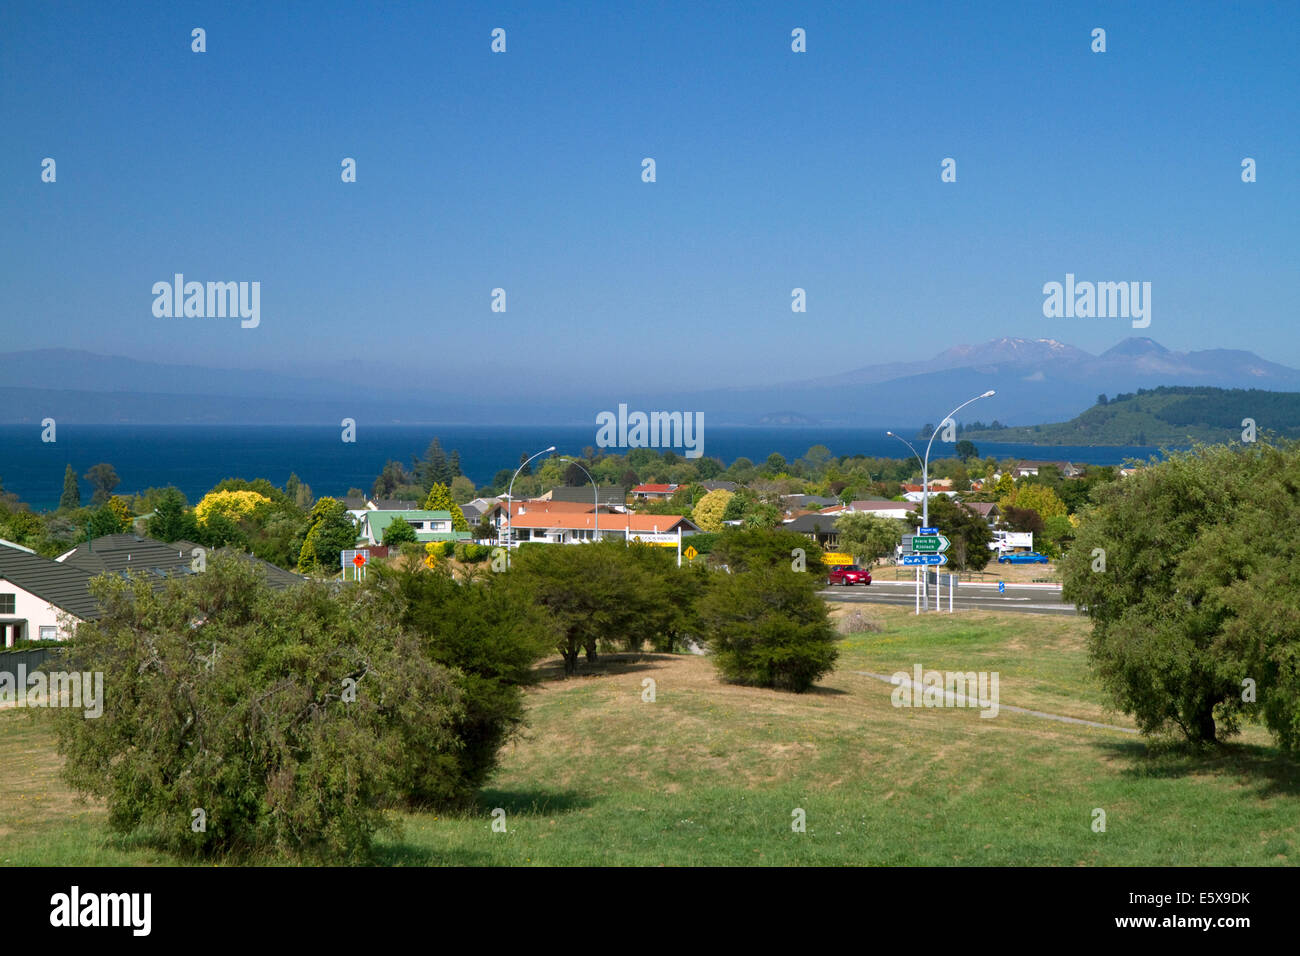 The town of Taupo sits on the shore of Lake Taupo in the Waikato Region, North Island, New Zealand. Stock Photo